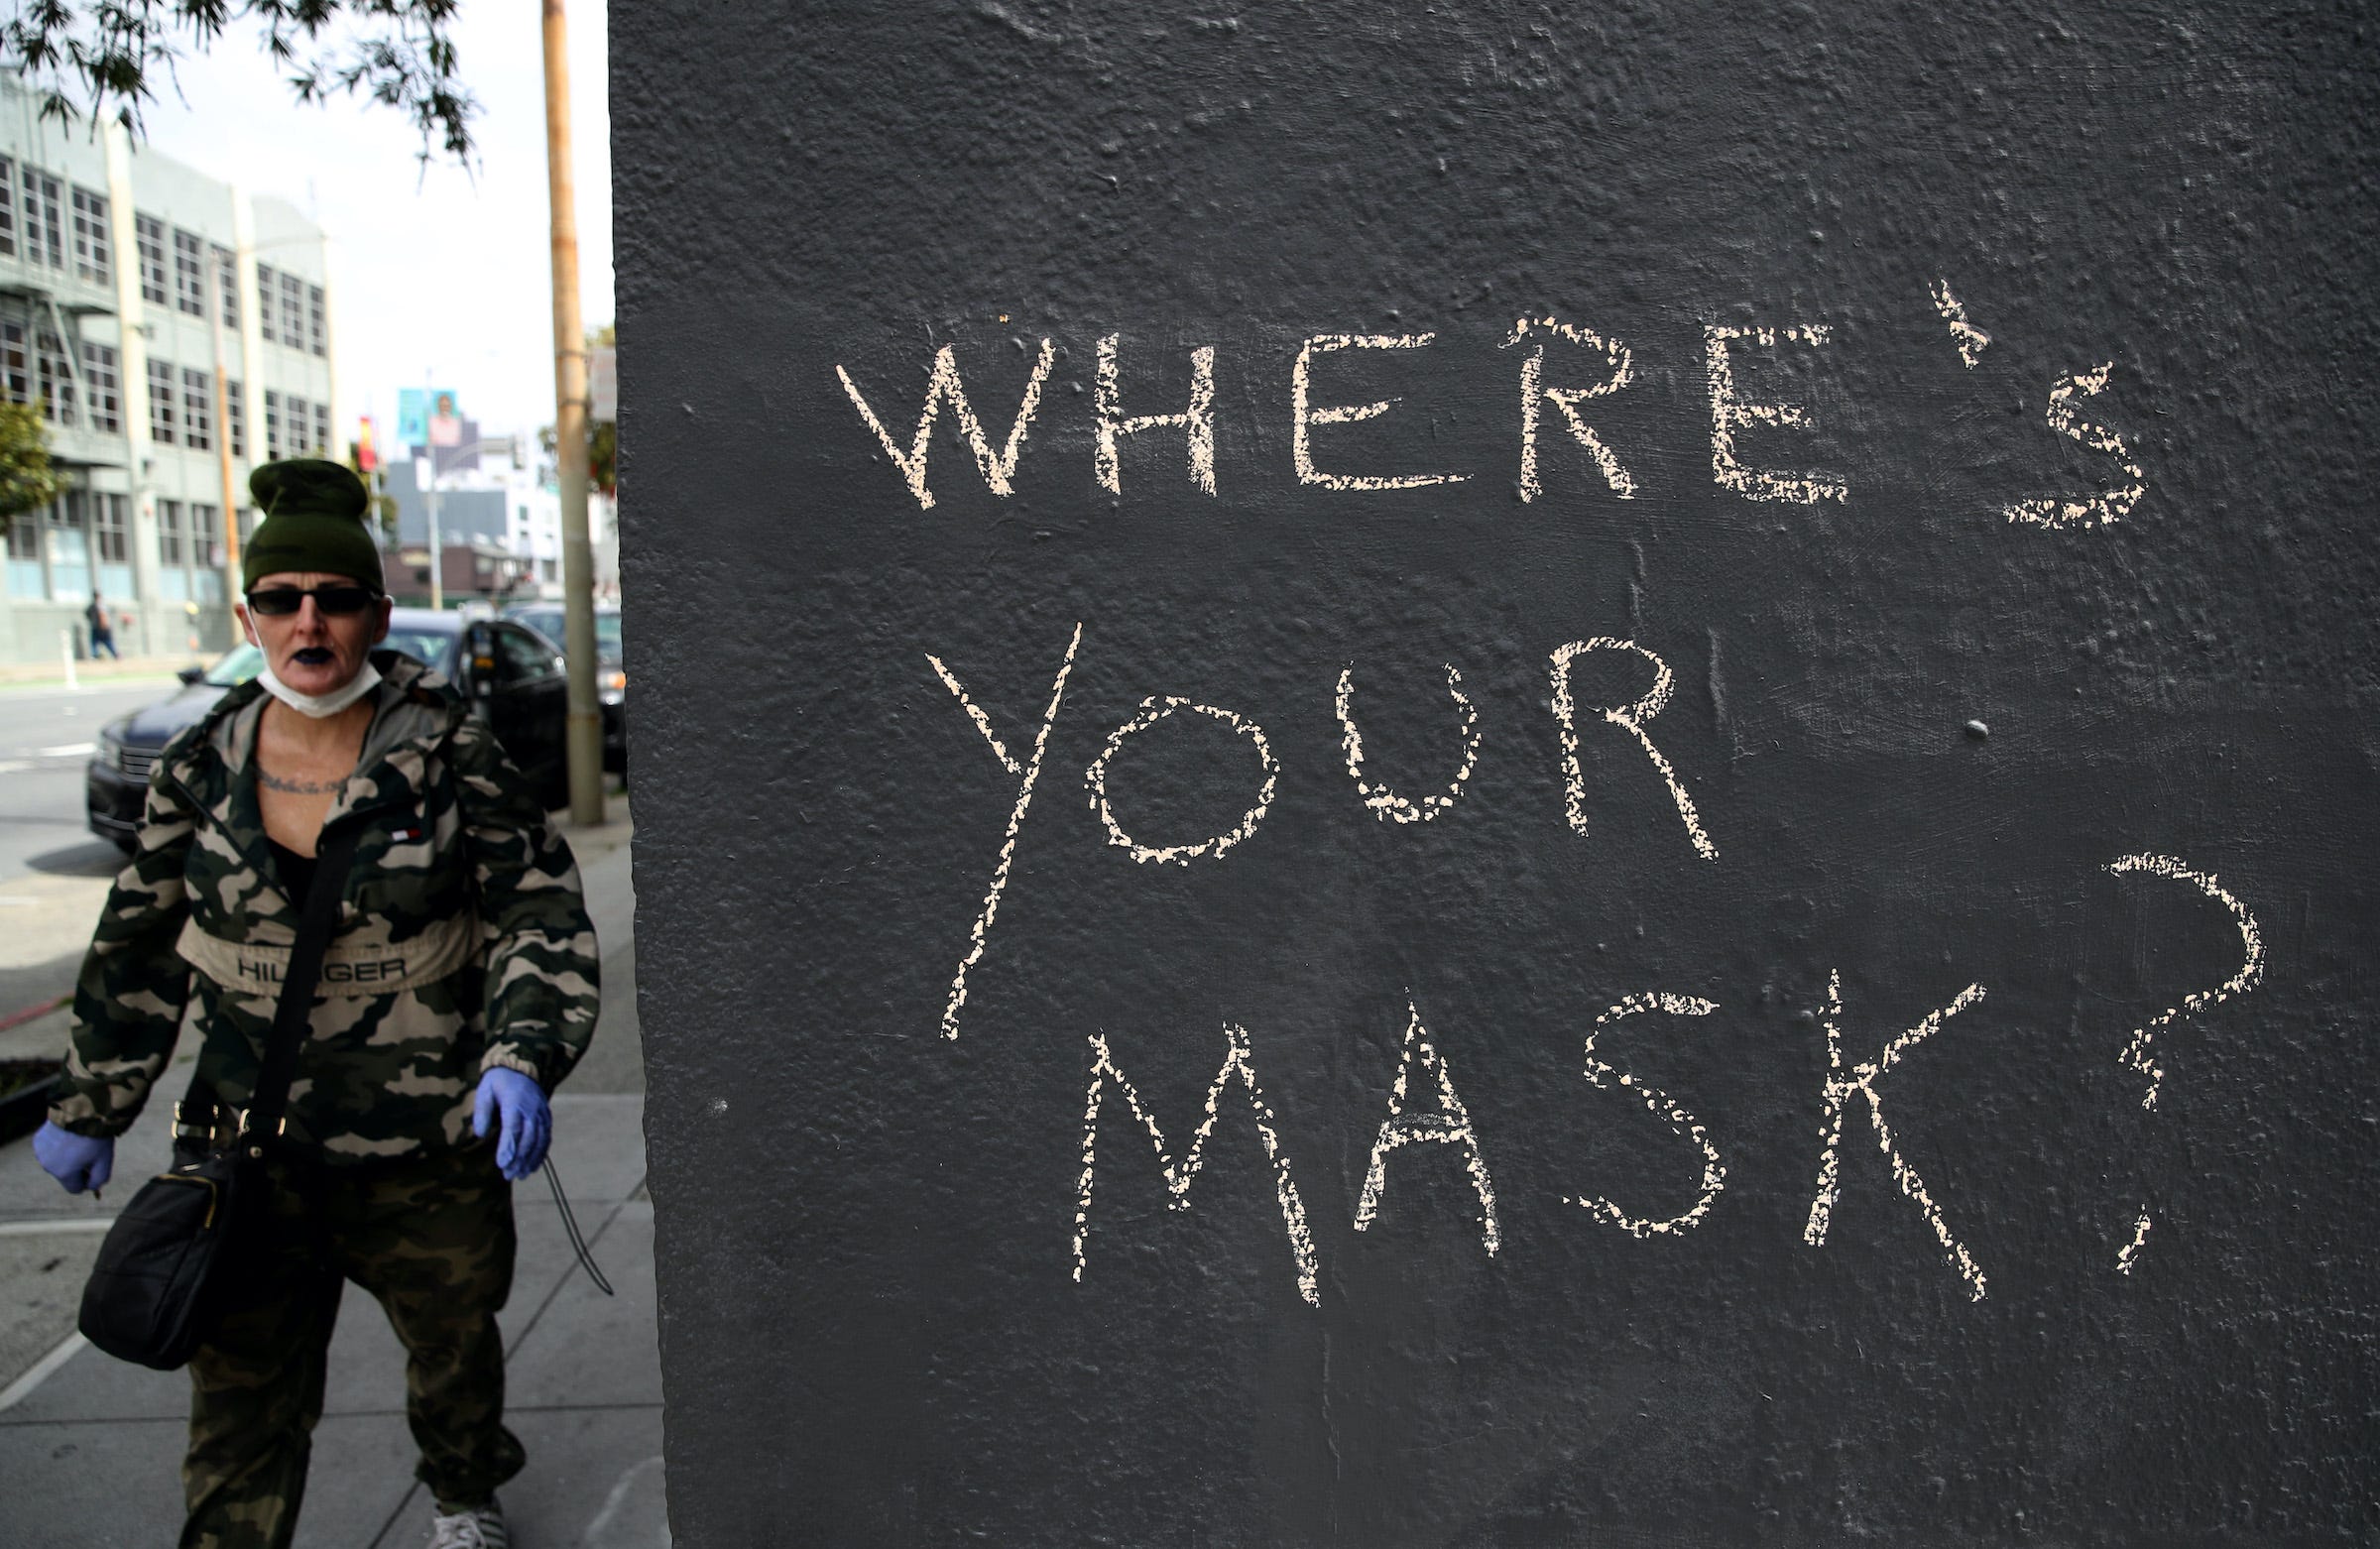 On the right side, three-quarters of the pic is a black exterior wall with “Where’s your mask?” written on it in chalk. The quarter of the photo on the left side is a person wearing latex gloves and a face mask, the latter under their chin.